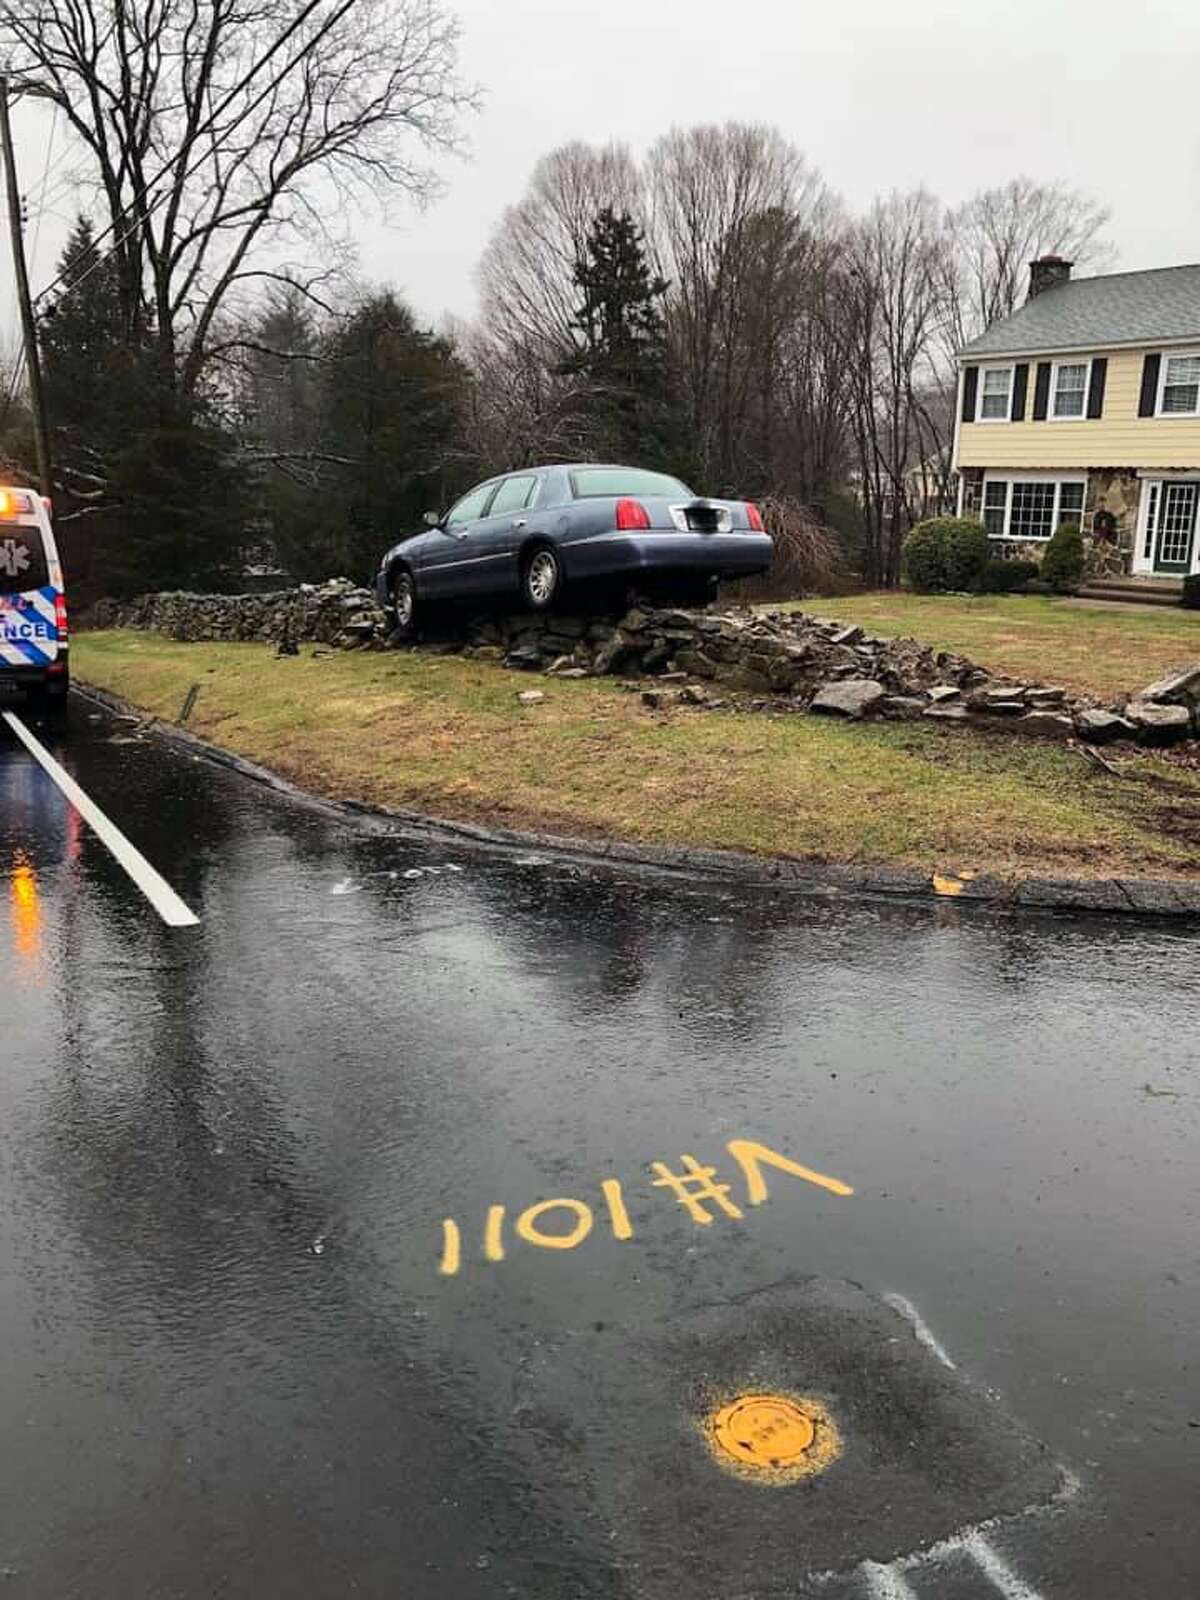 Around 11:20 a.m. Friday, Dec. 28, 2018, Trumbull, Conn., firefighters from the Long Hill station responded with Trumbull emergency medical service personnel to the area of Madison Avenue and Saxony Drive for a report of a crash with injuries. Edits to the license plate were done by fire officials, not Hearst Connecticut Media.